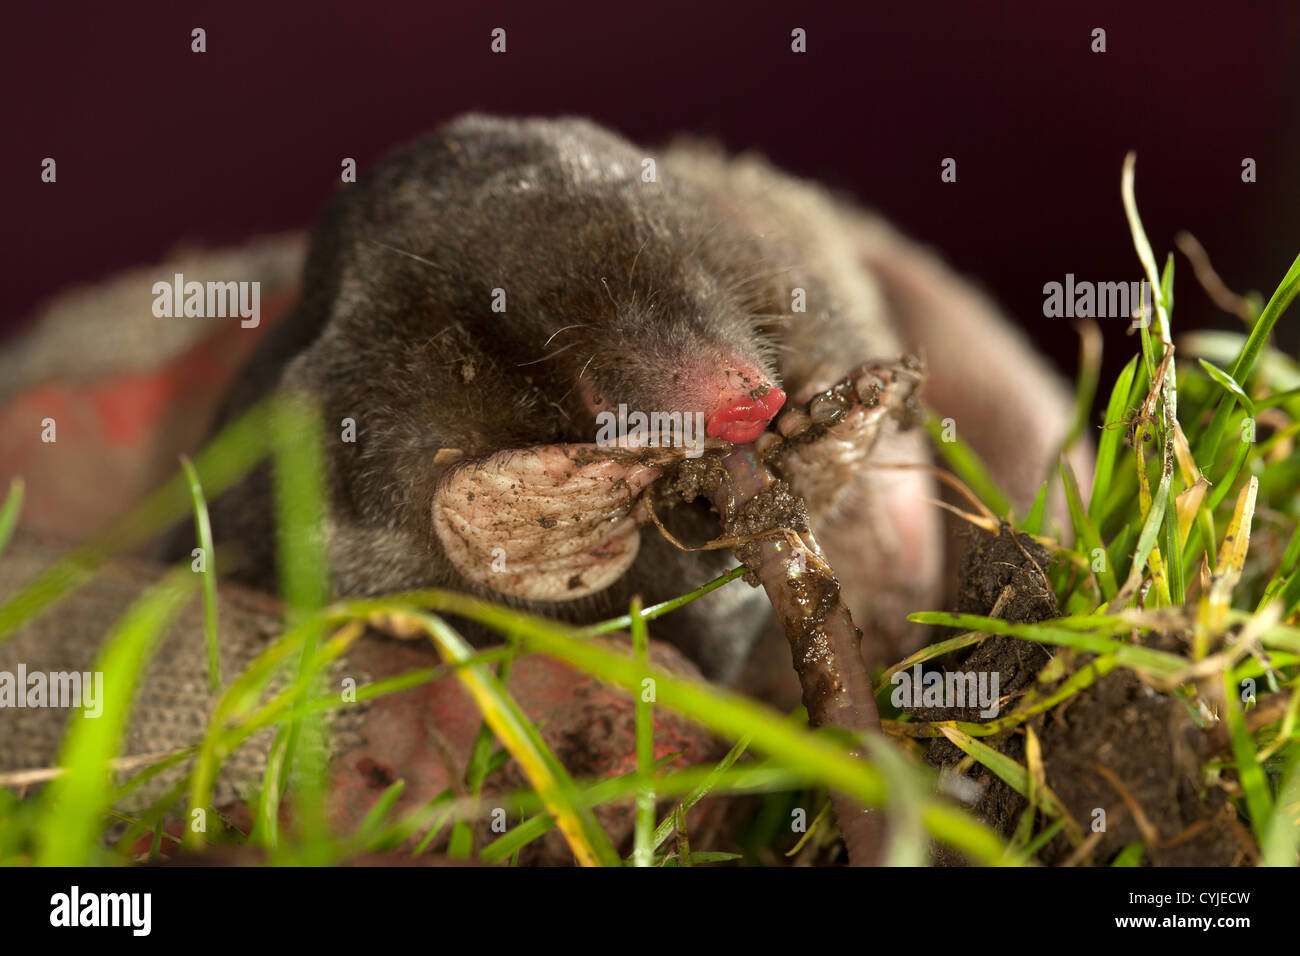 Close Up View of a Live Common Mole Talpa europaea Eating a Worm While Being Picked up by a Gardener UK Stock Photo